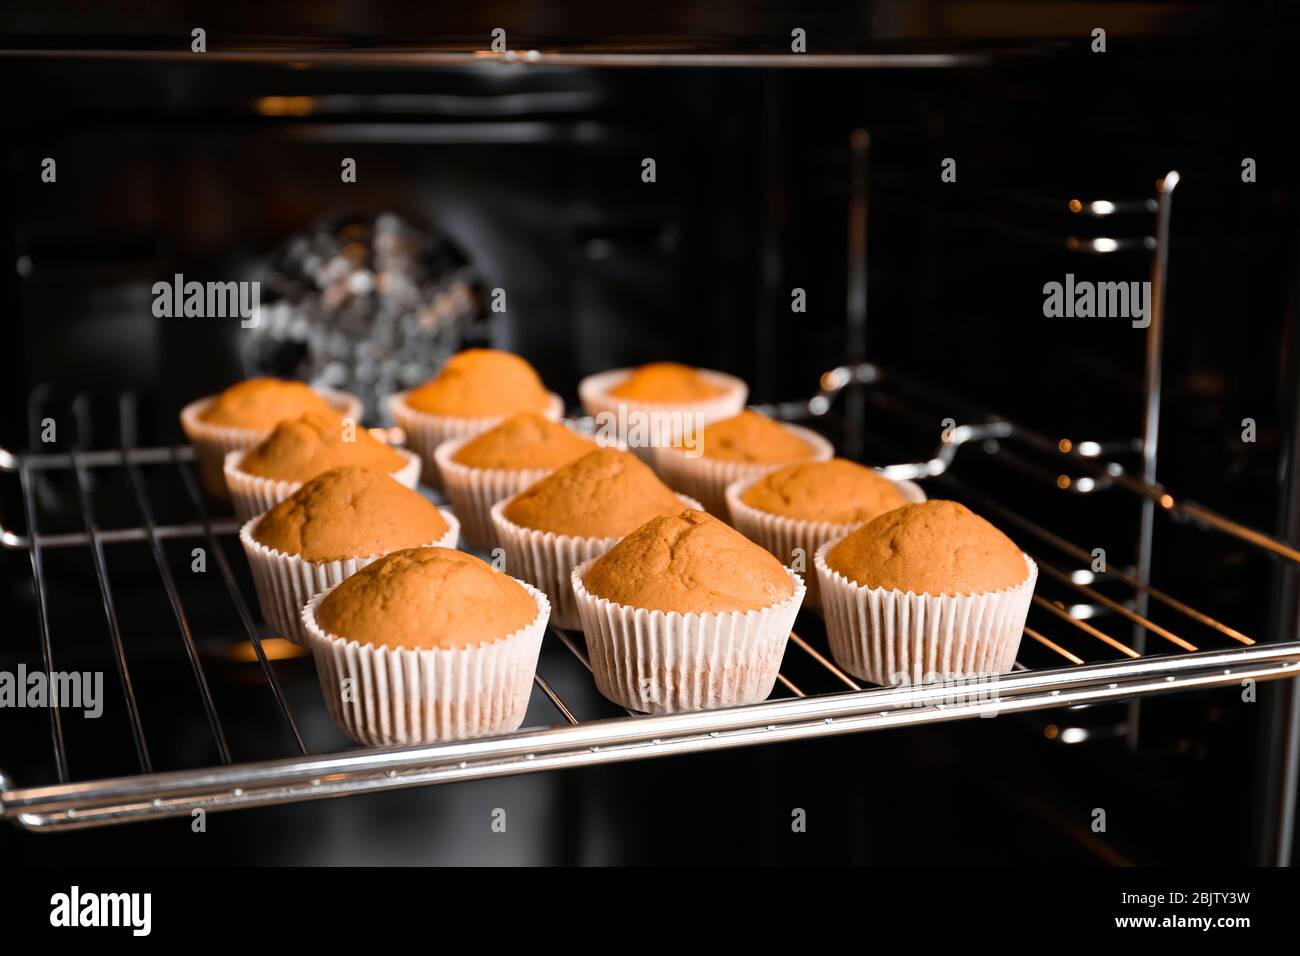 Tasty Cupcakes On Baking Rack In Oven Stock Photo - Alamy